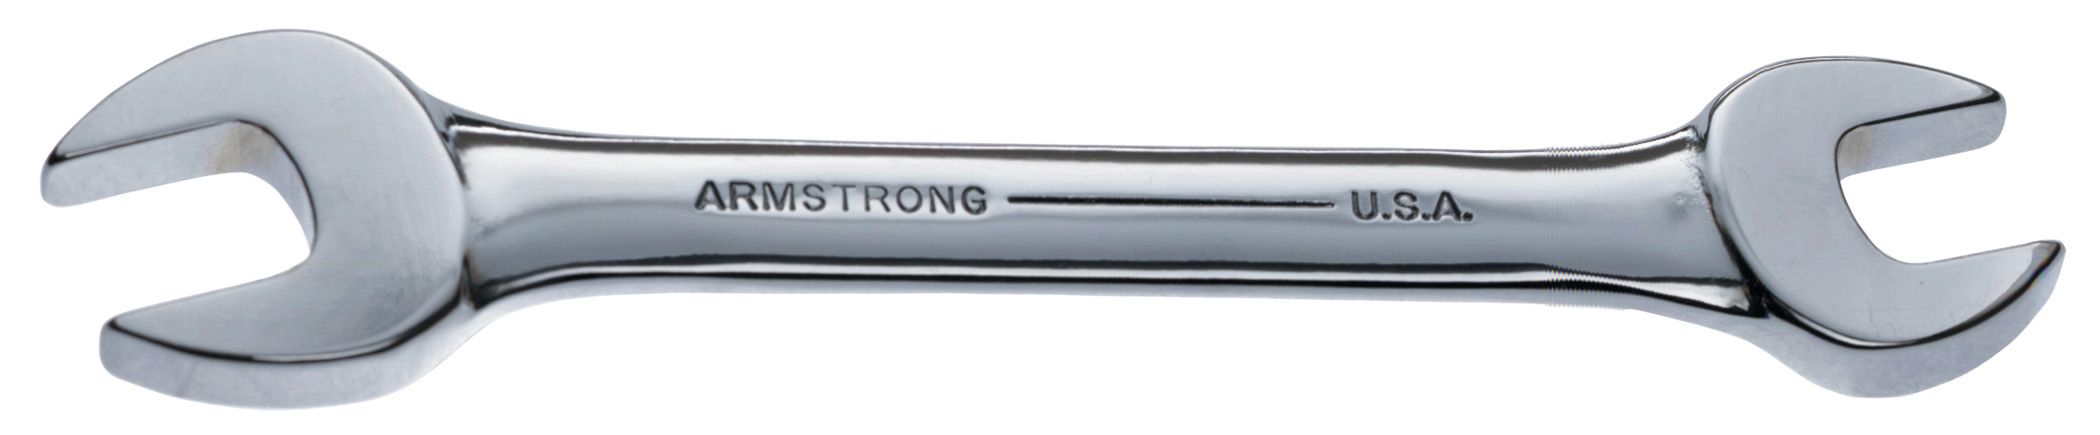 Armstrong 1-1/2 x 1-5/8 Full Polish Open End Wrench